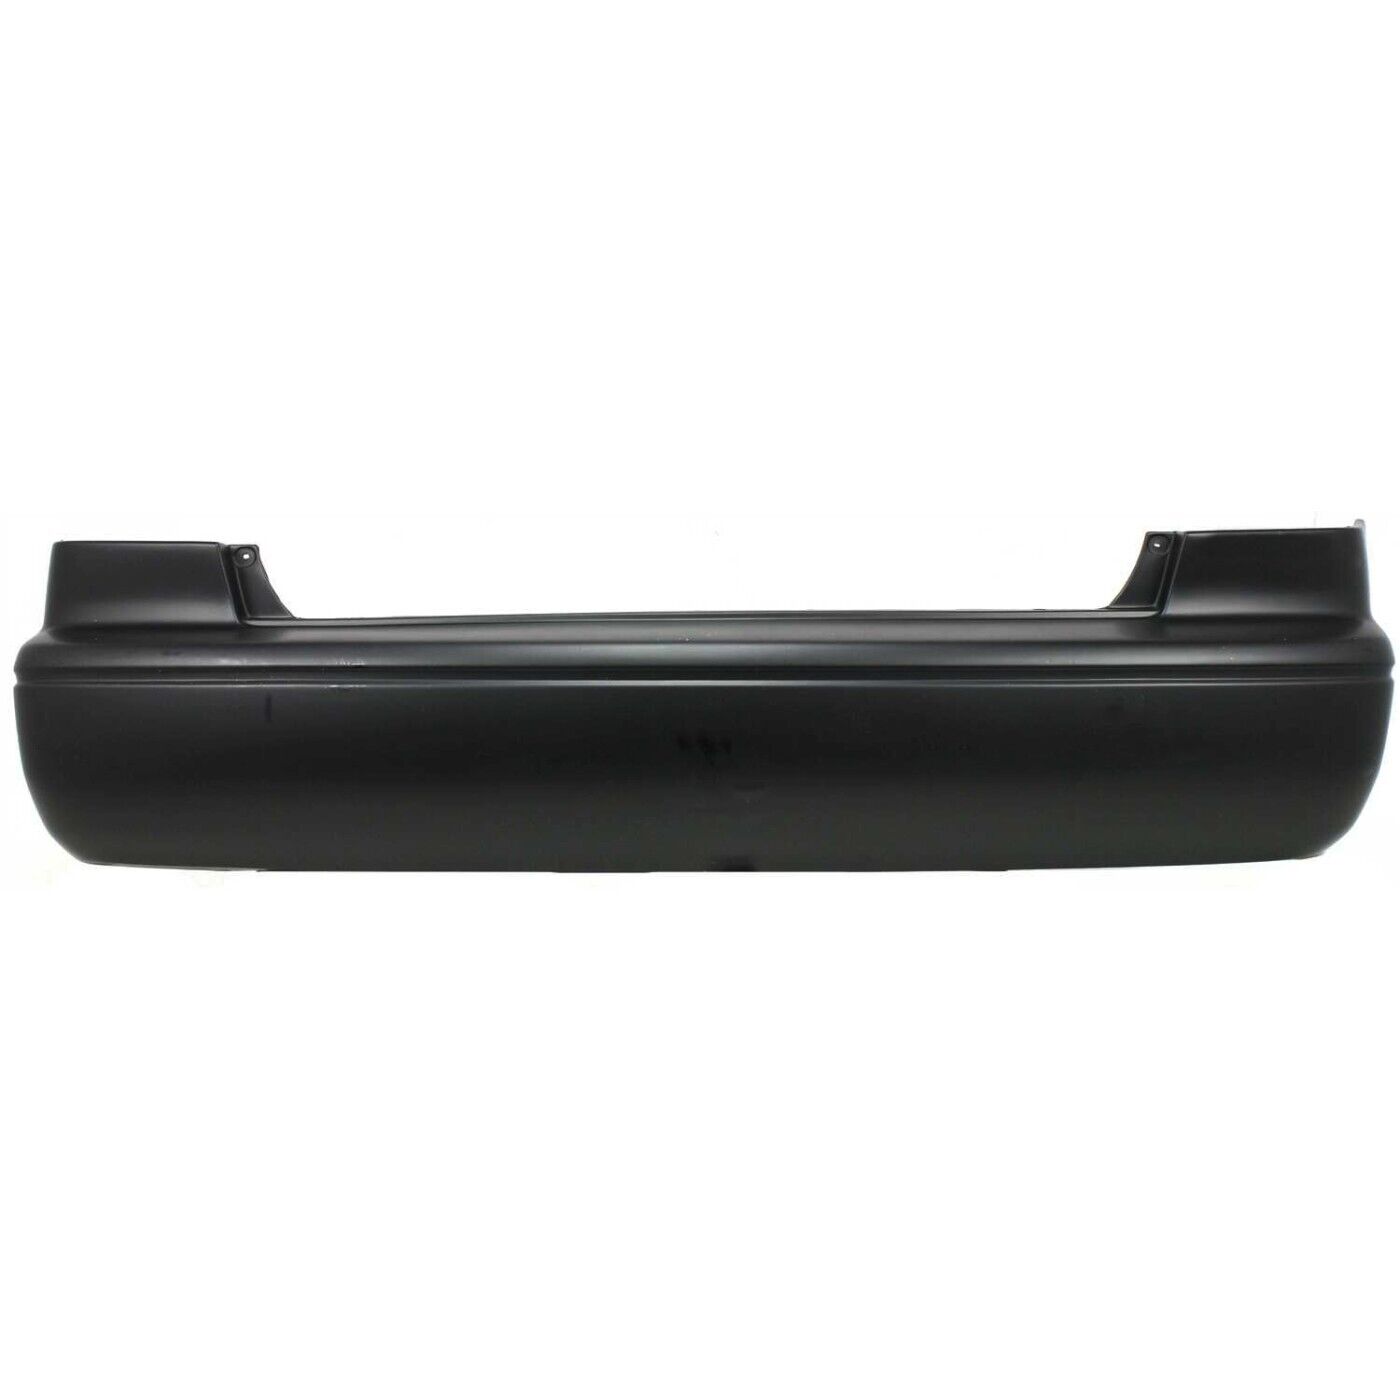 Rear Bumper Cover For 2000-2001 Toyota Camry Primed Plastic TO1100194 52159AA902